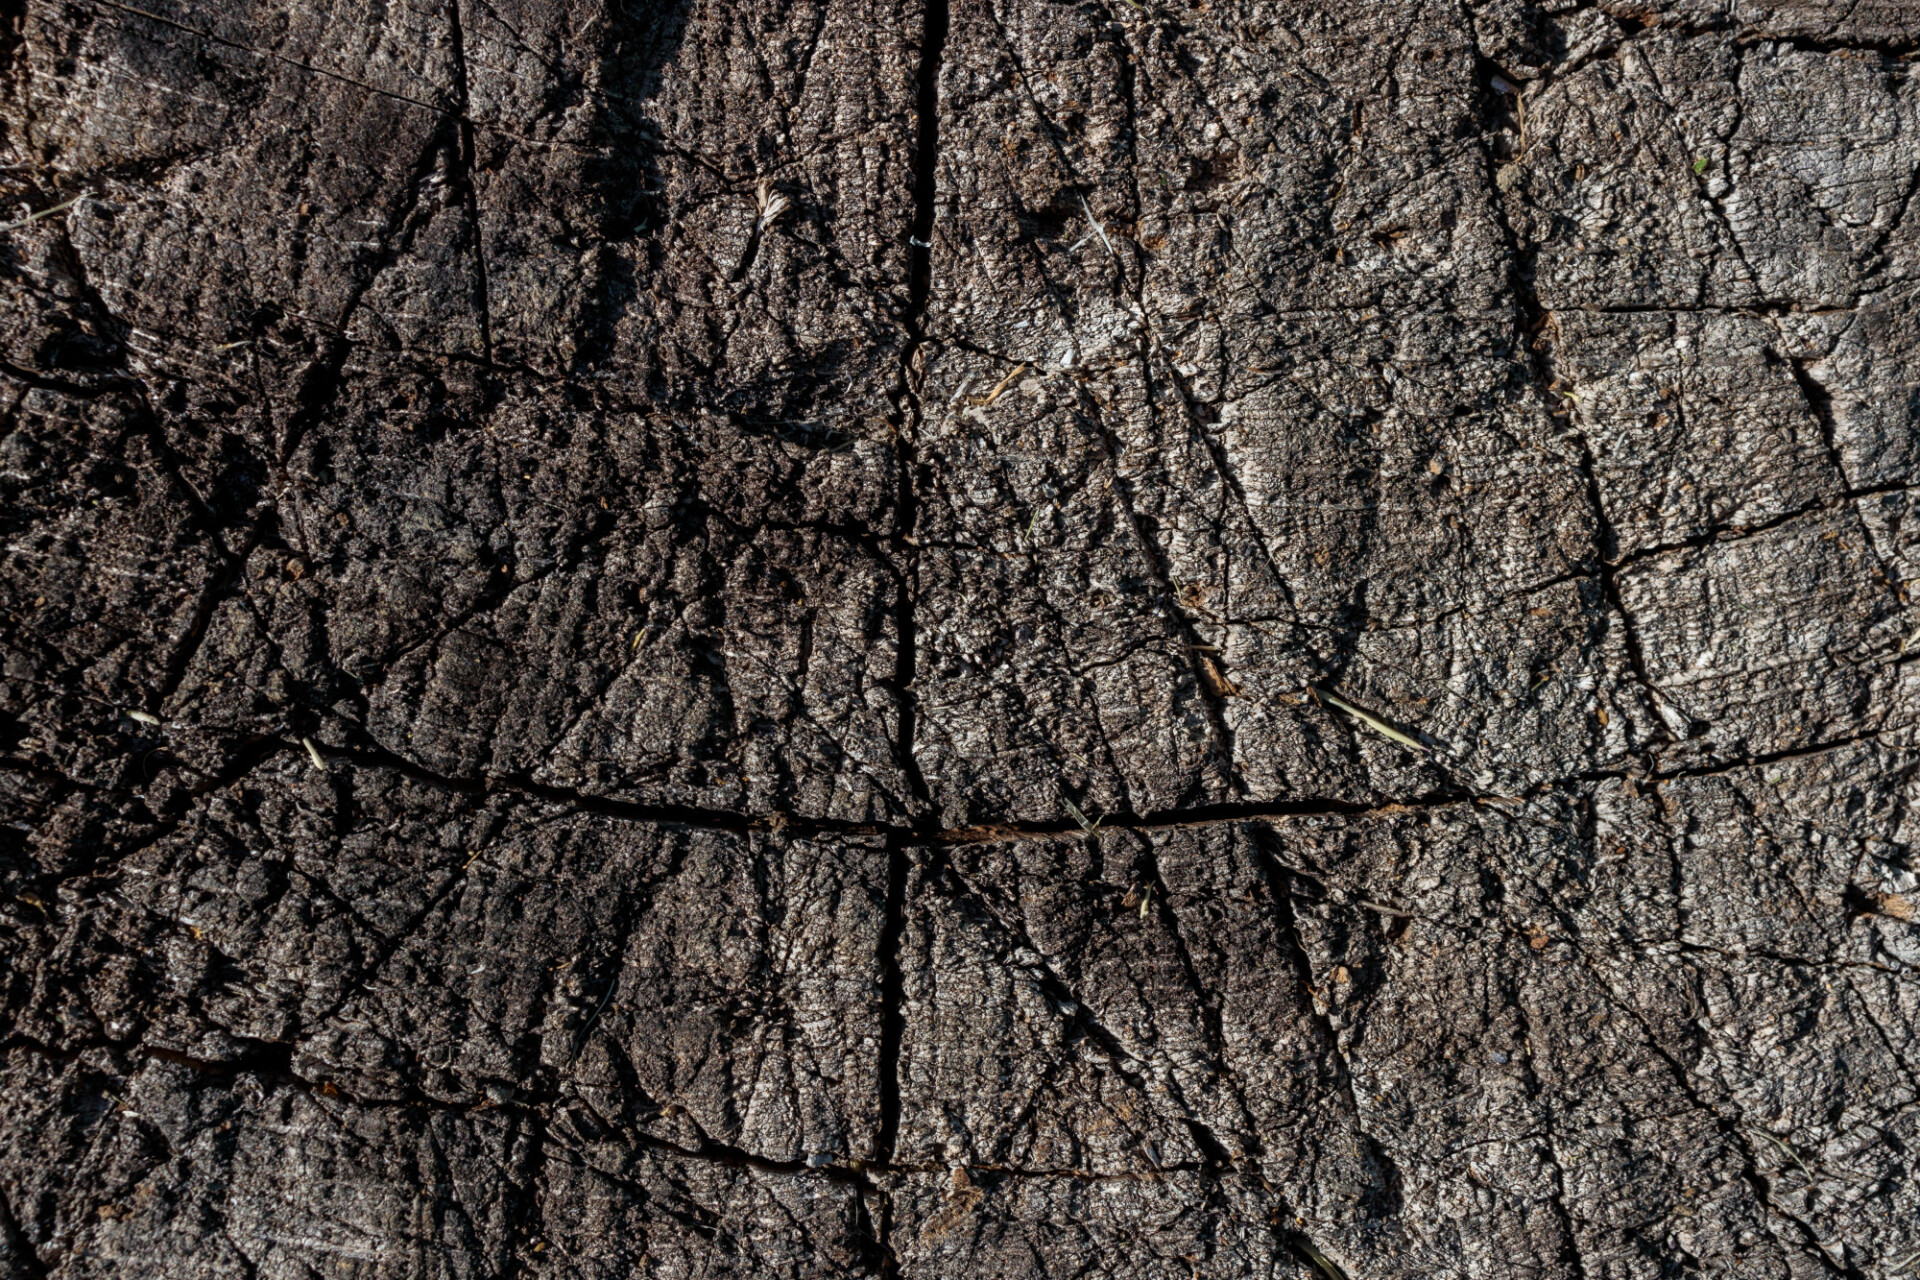 Rough wood texture with deep notches